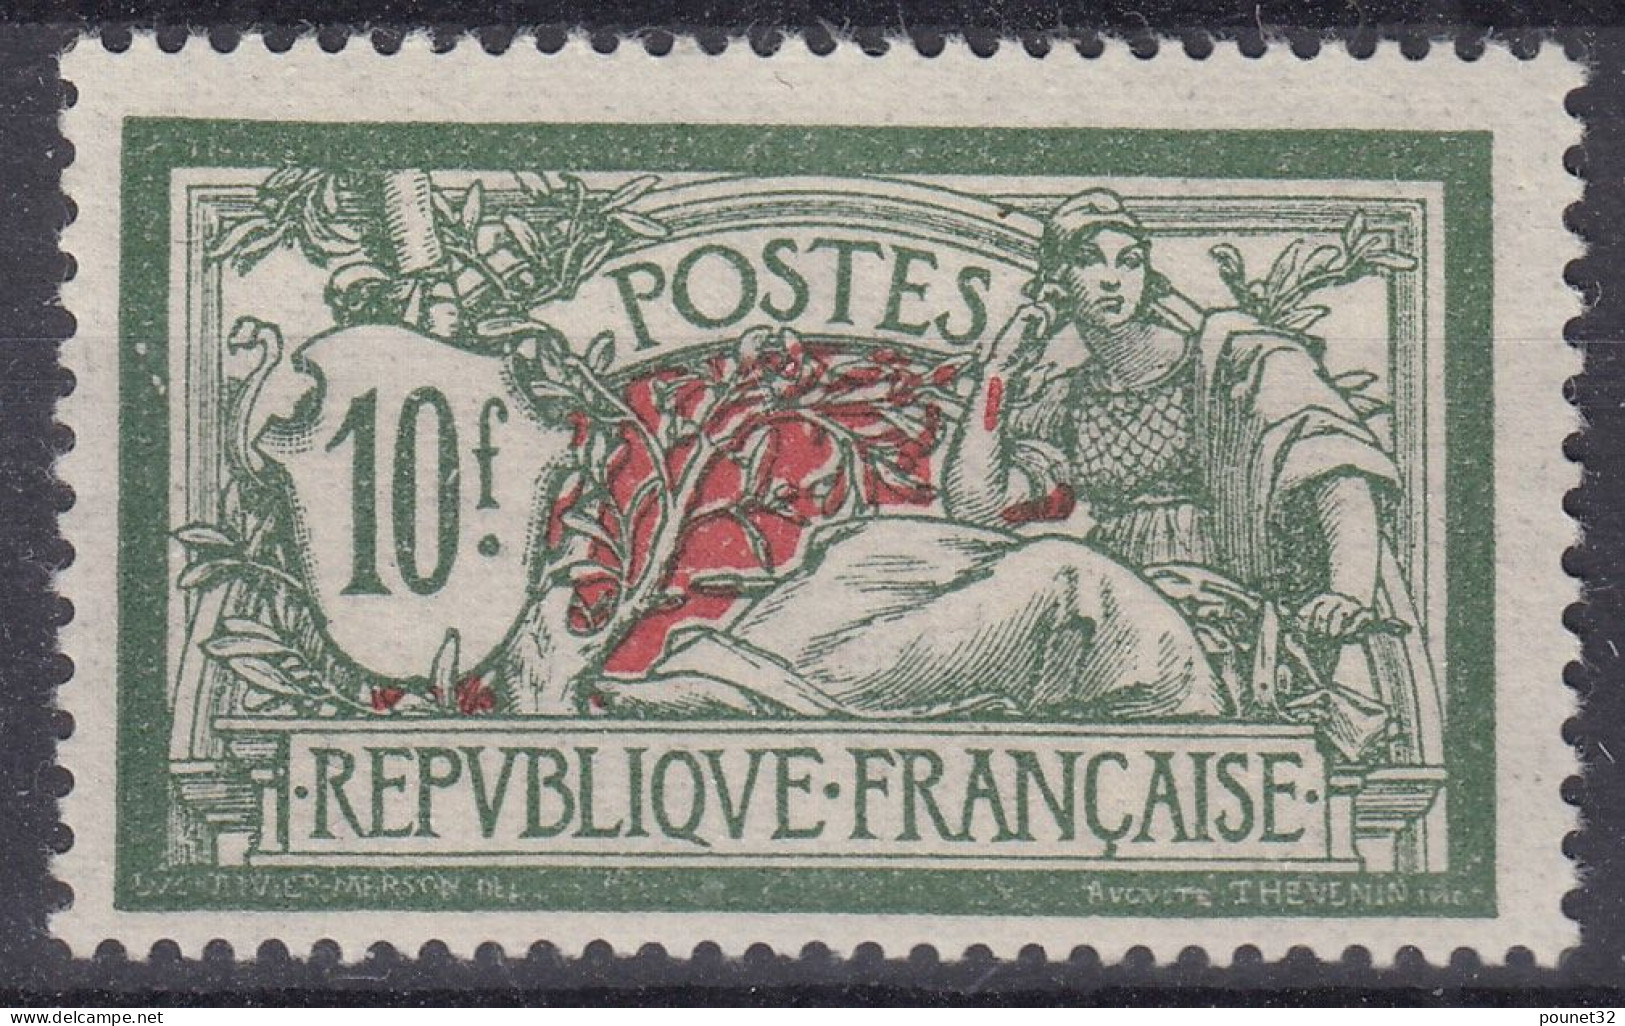 TIMBRE FRANCE MERSON N° 207 NEUF GOMME ALTEREE SANS CHARNIERE - COTE 380 € - 1900-27 Merson